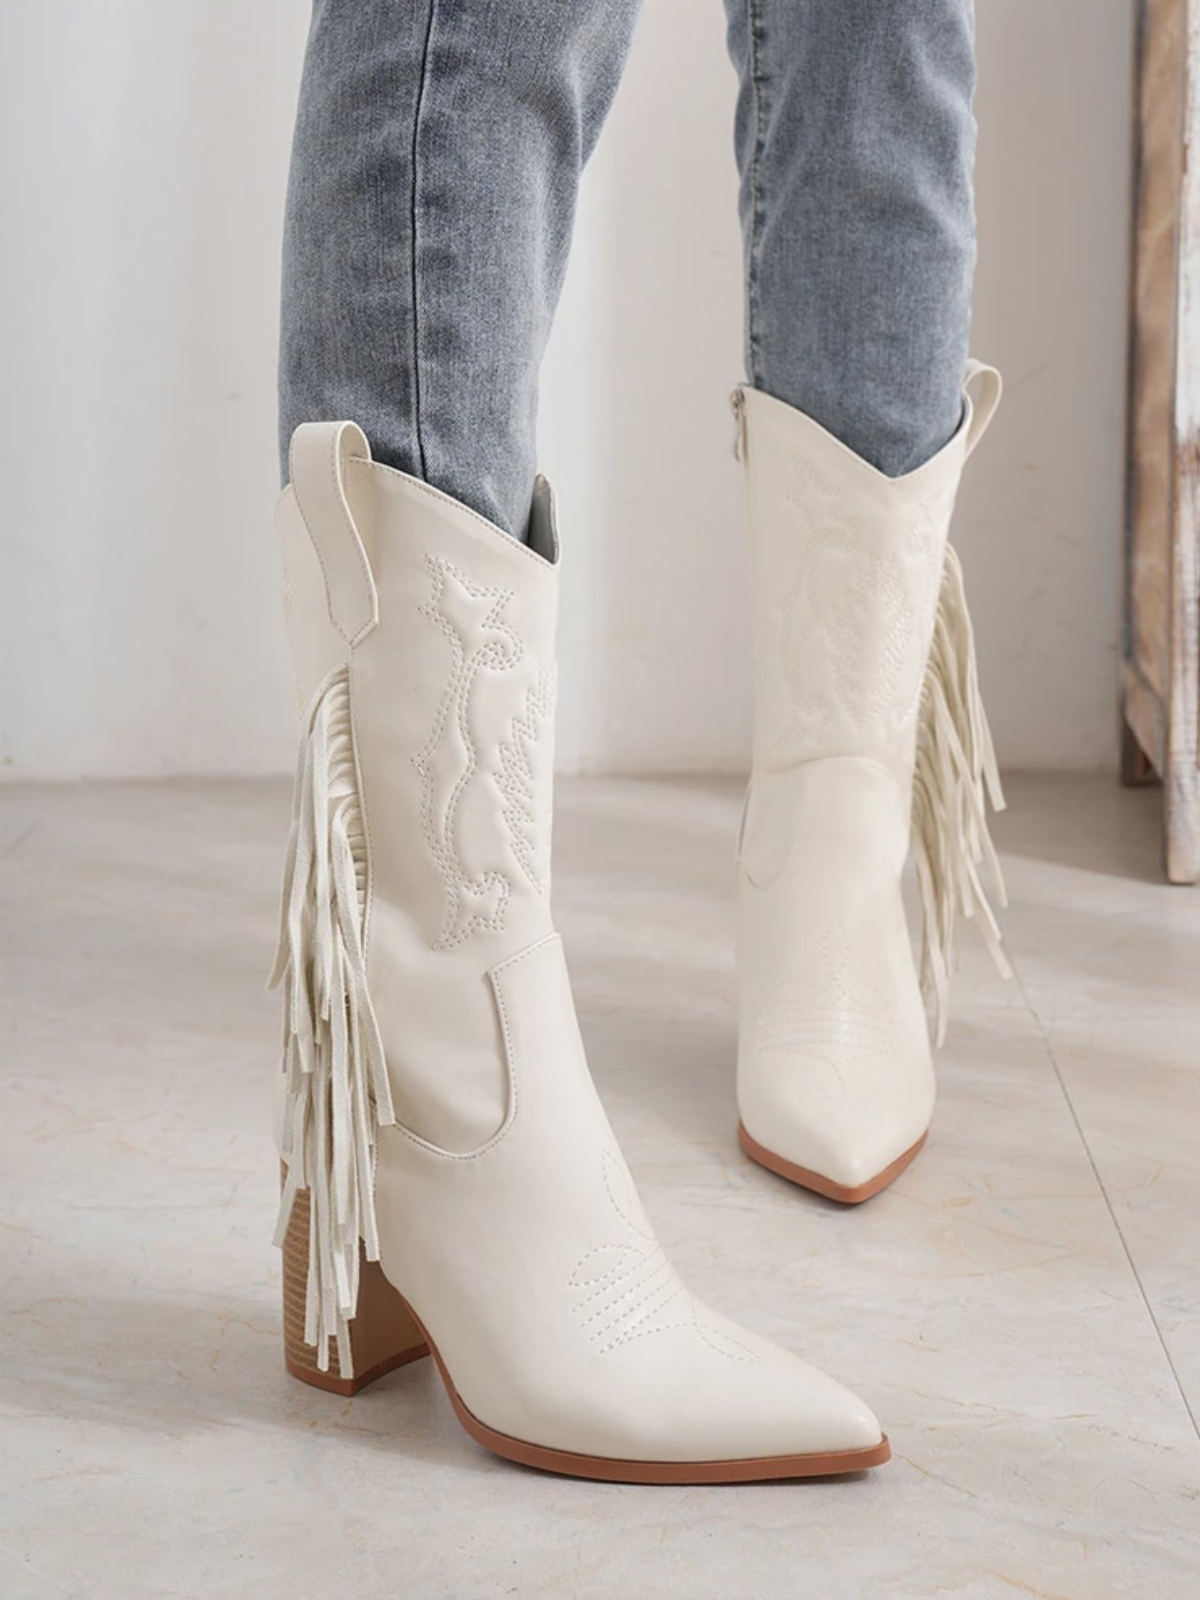 Mia Belle Girls Fringe Cowgirl Boots | Women's Shoes